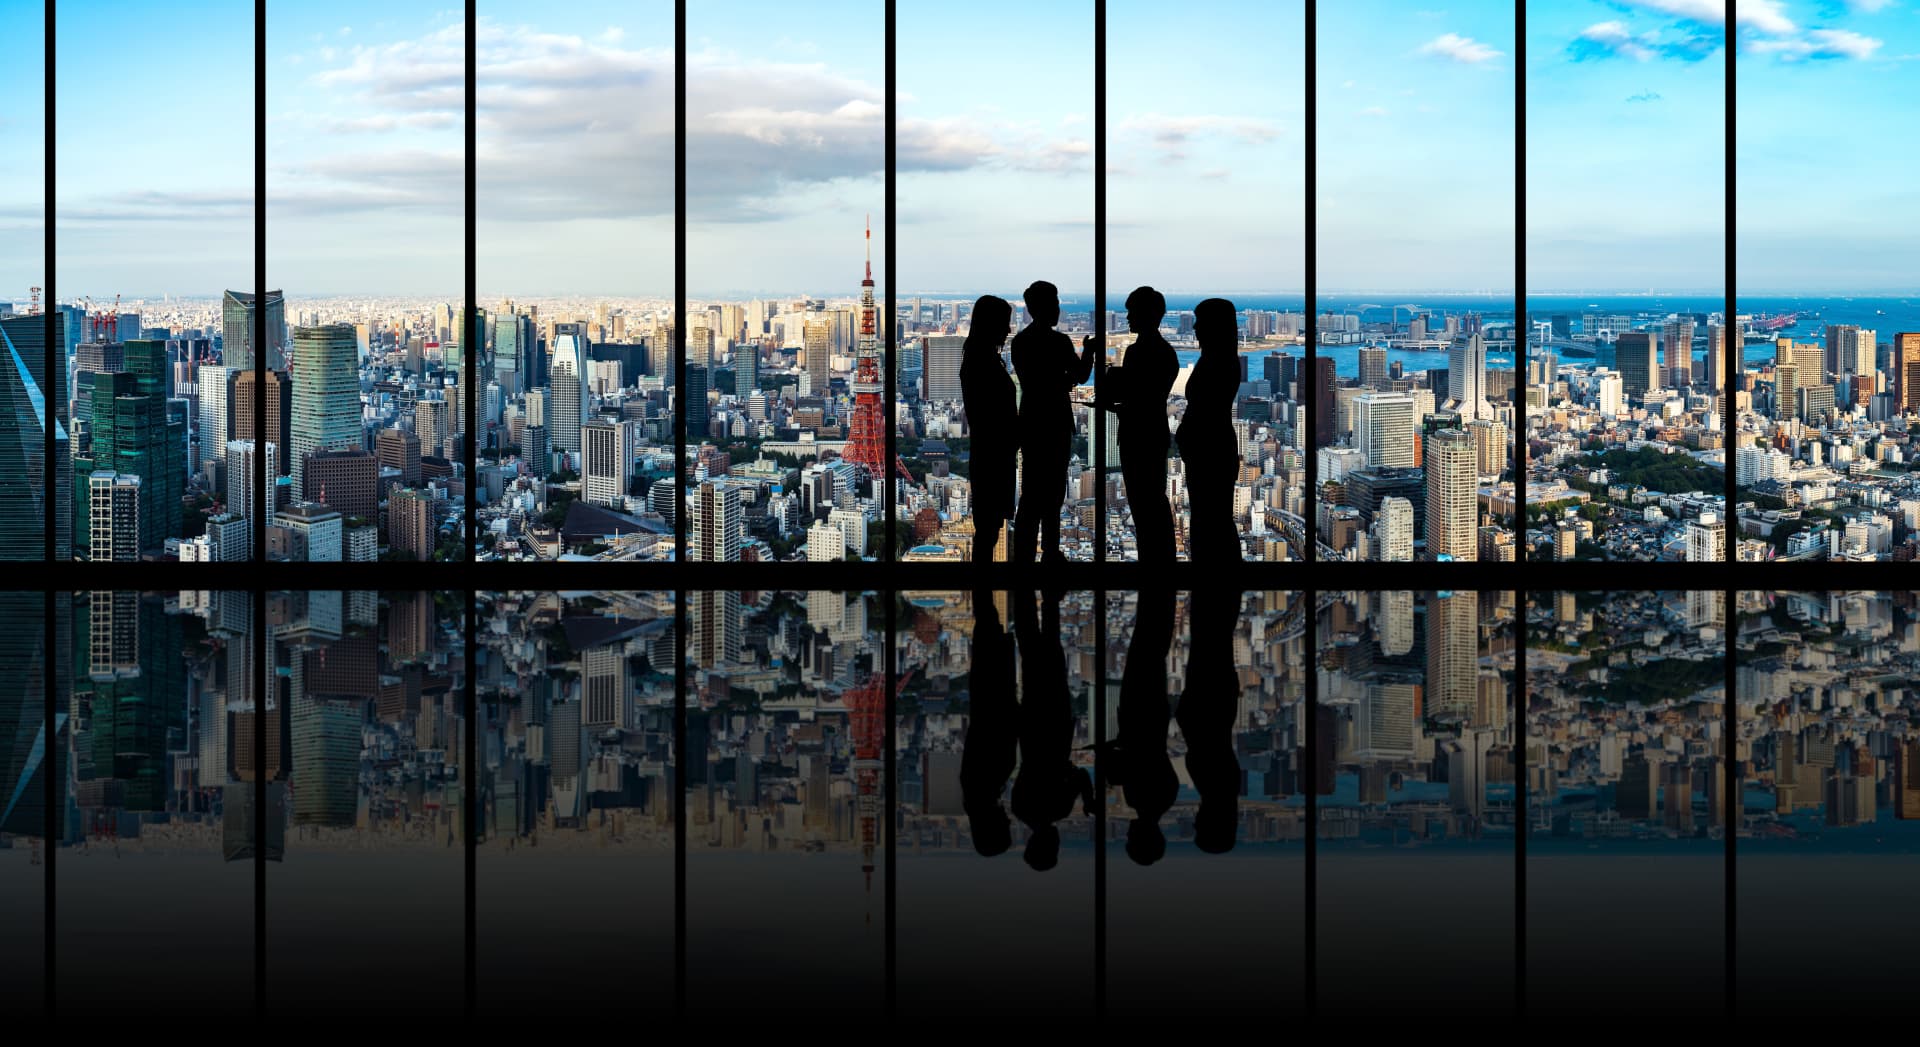 4 people standing in front of a window with a city skyline view